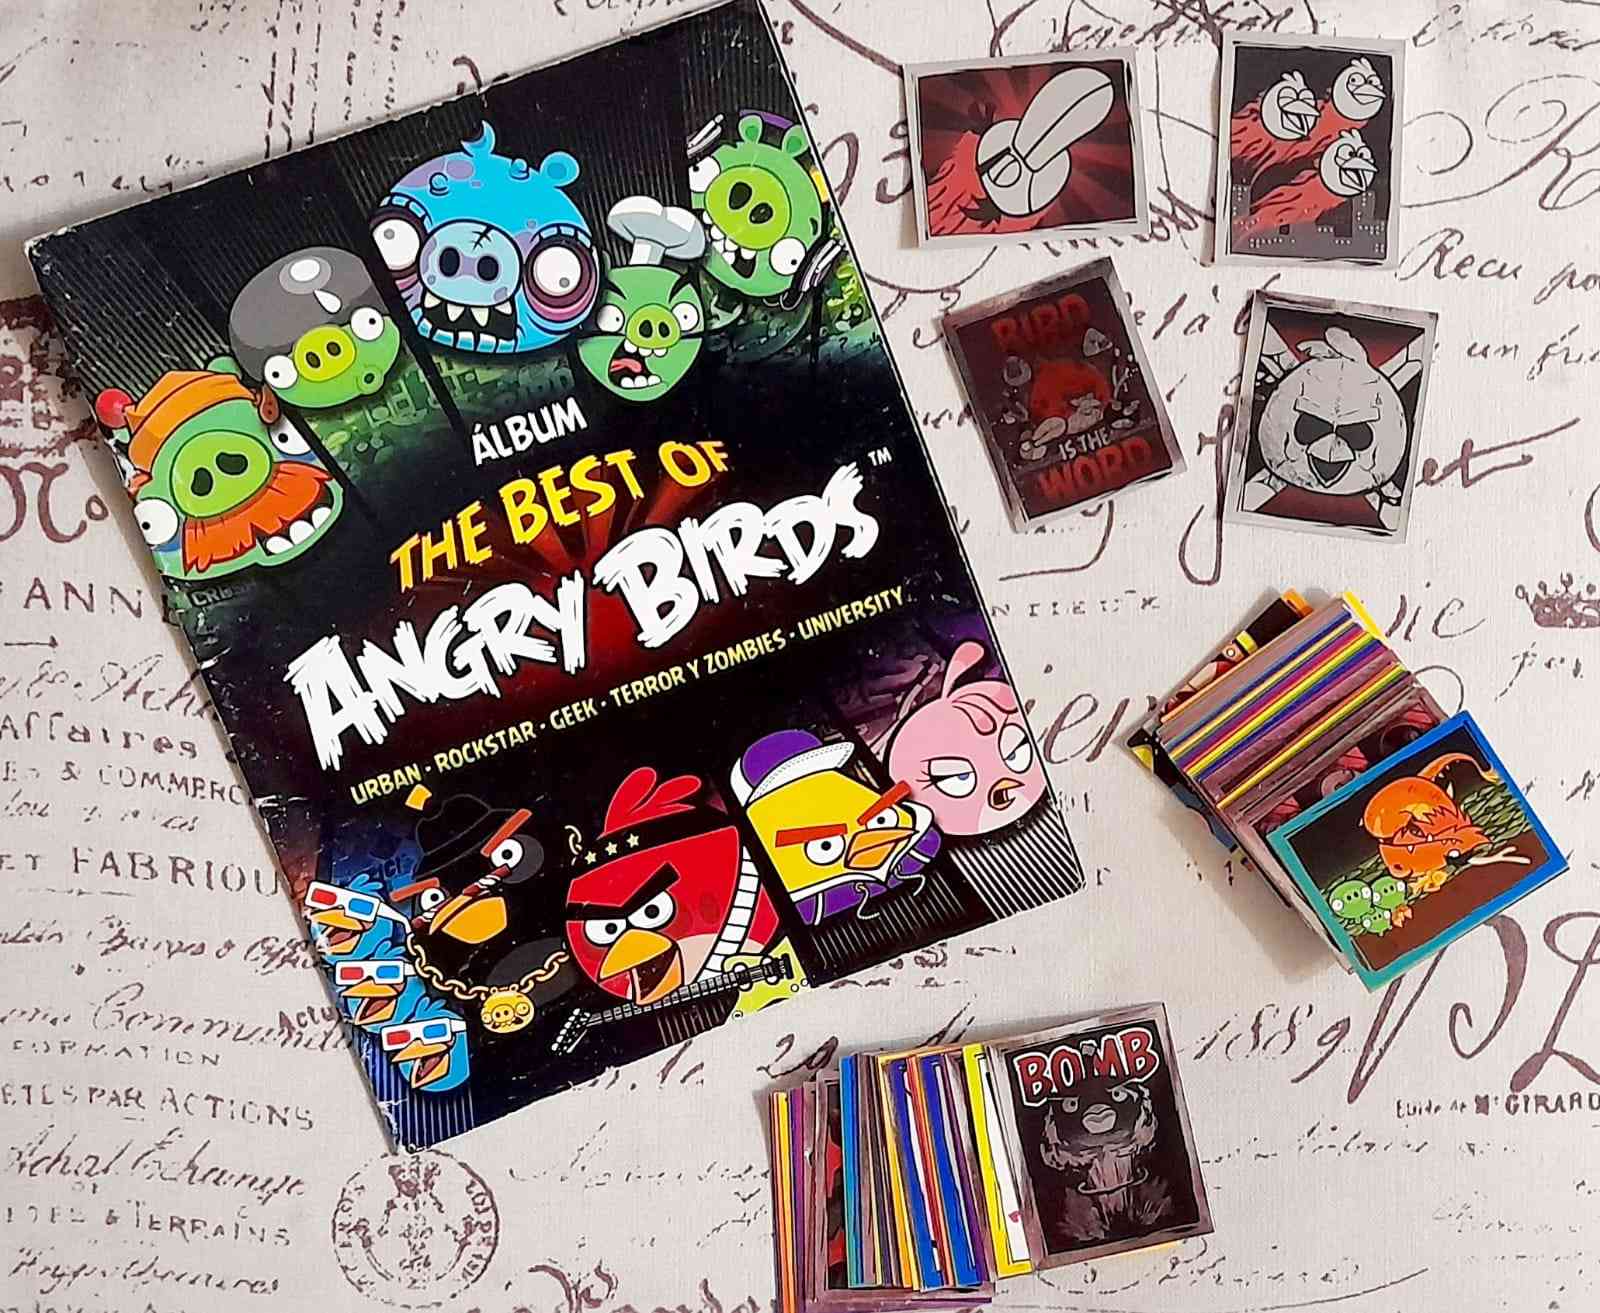 Album INCOMPLETO a pegar Angry Birds the best of 